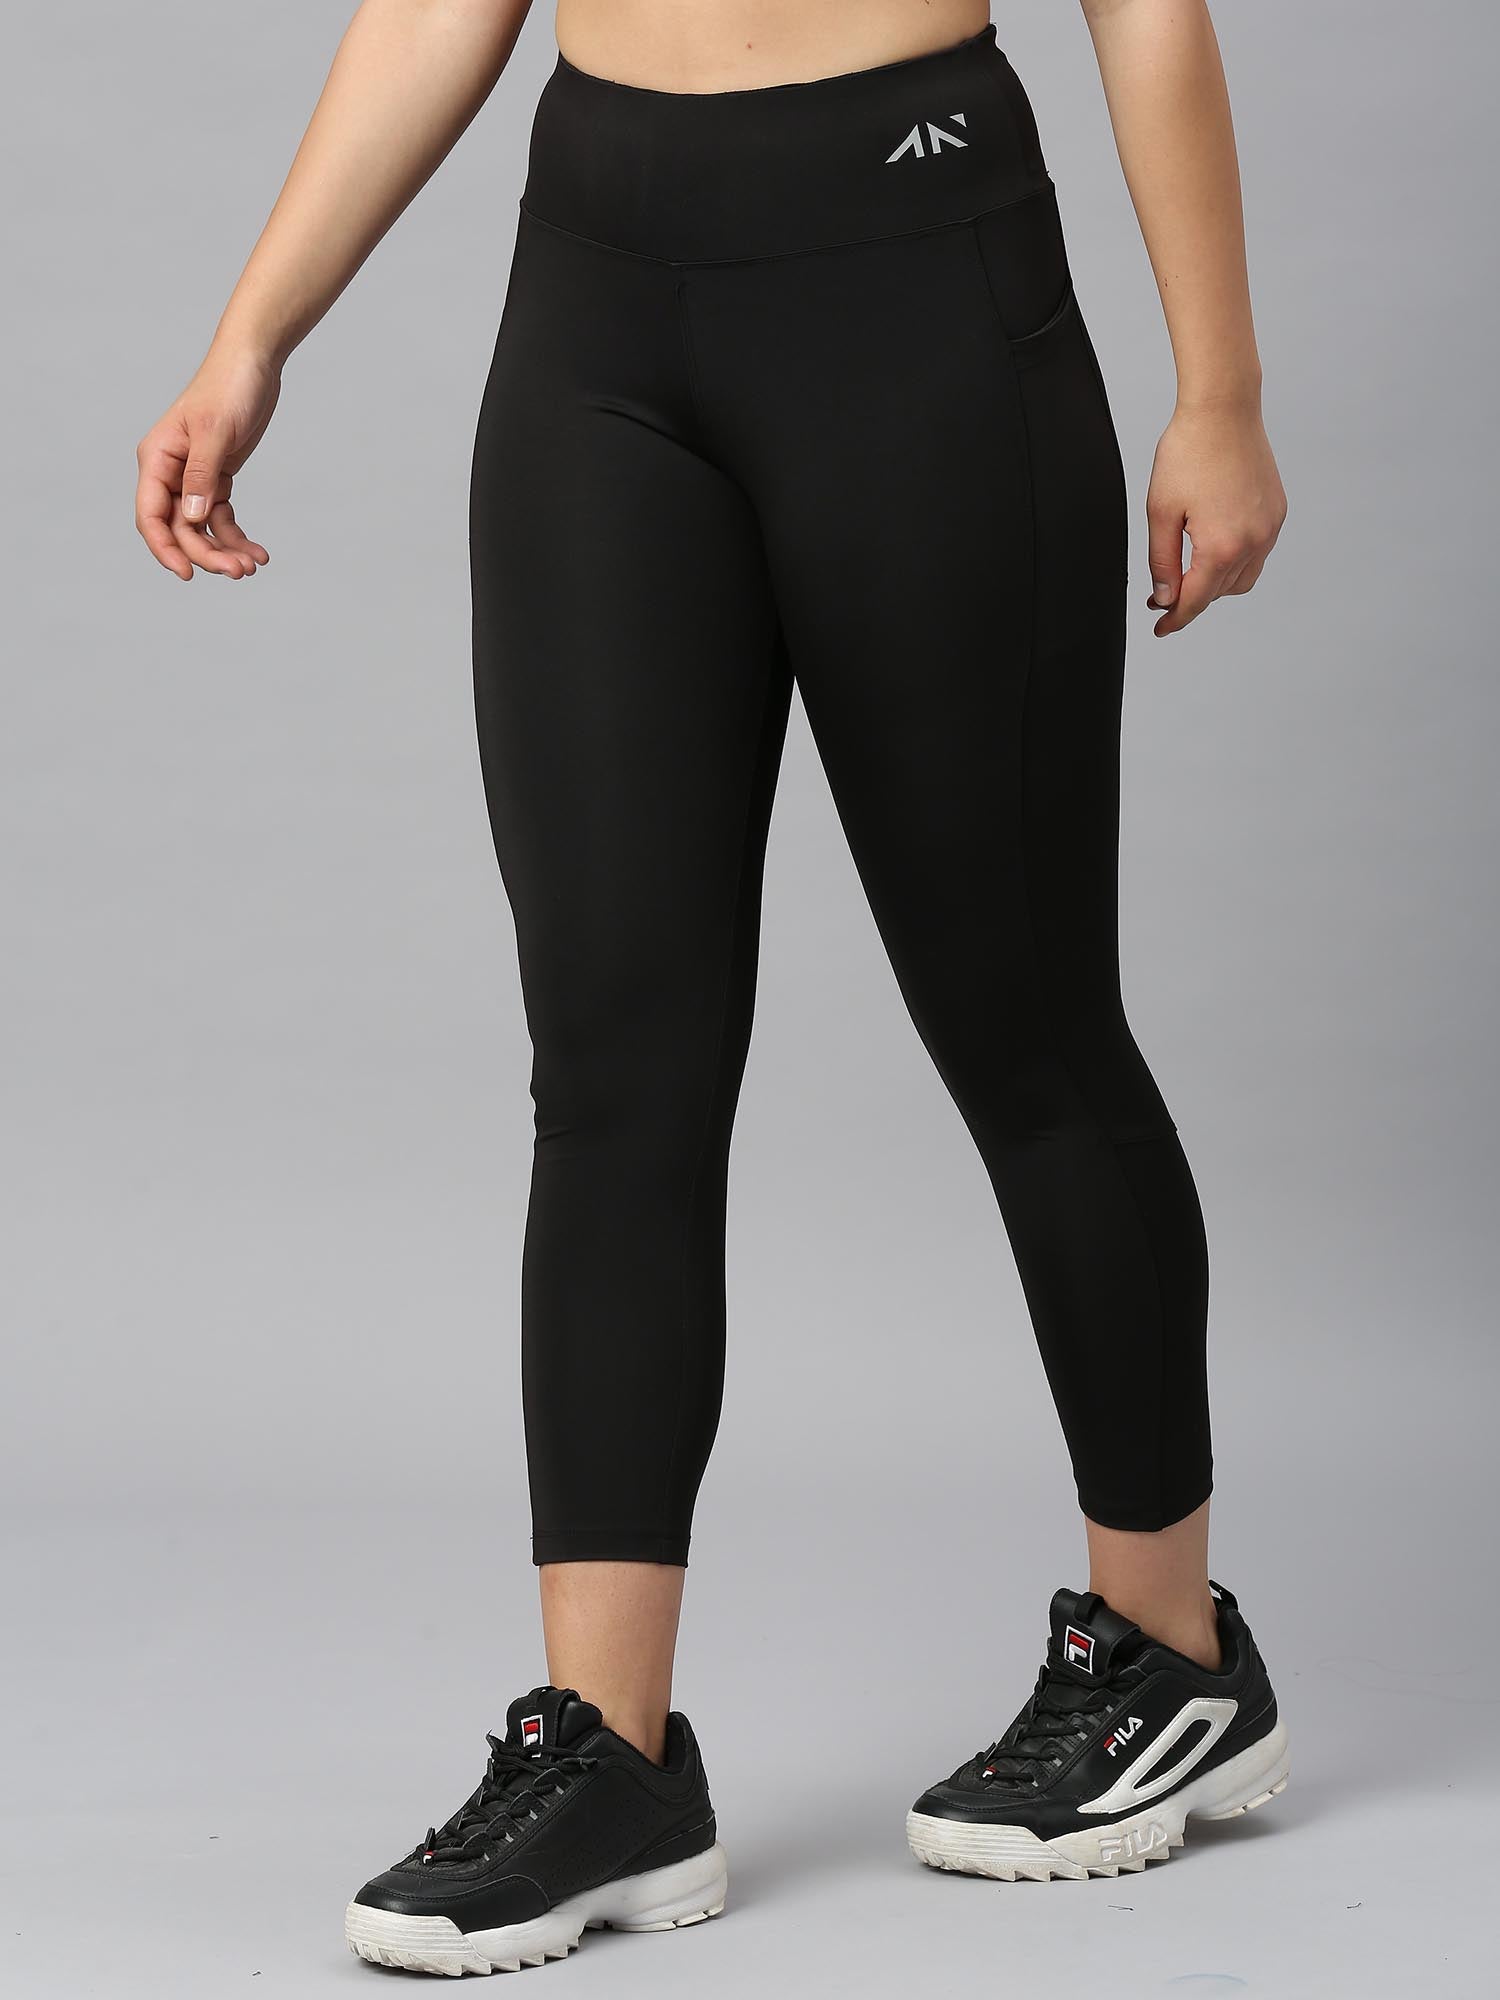 Black Smooth Pocket Leggings Caked Up- Women - Style and Speed Printing